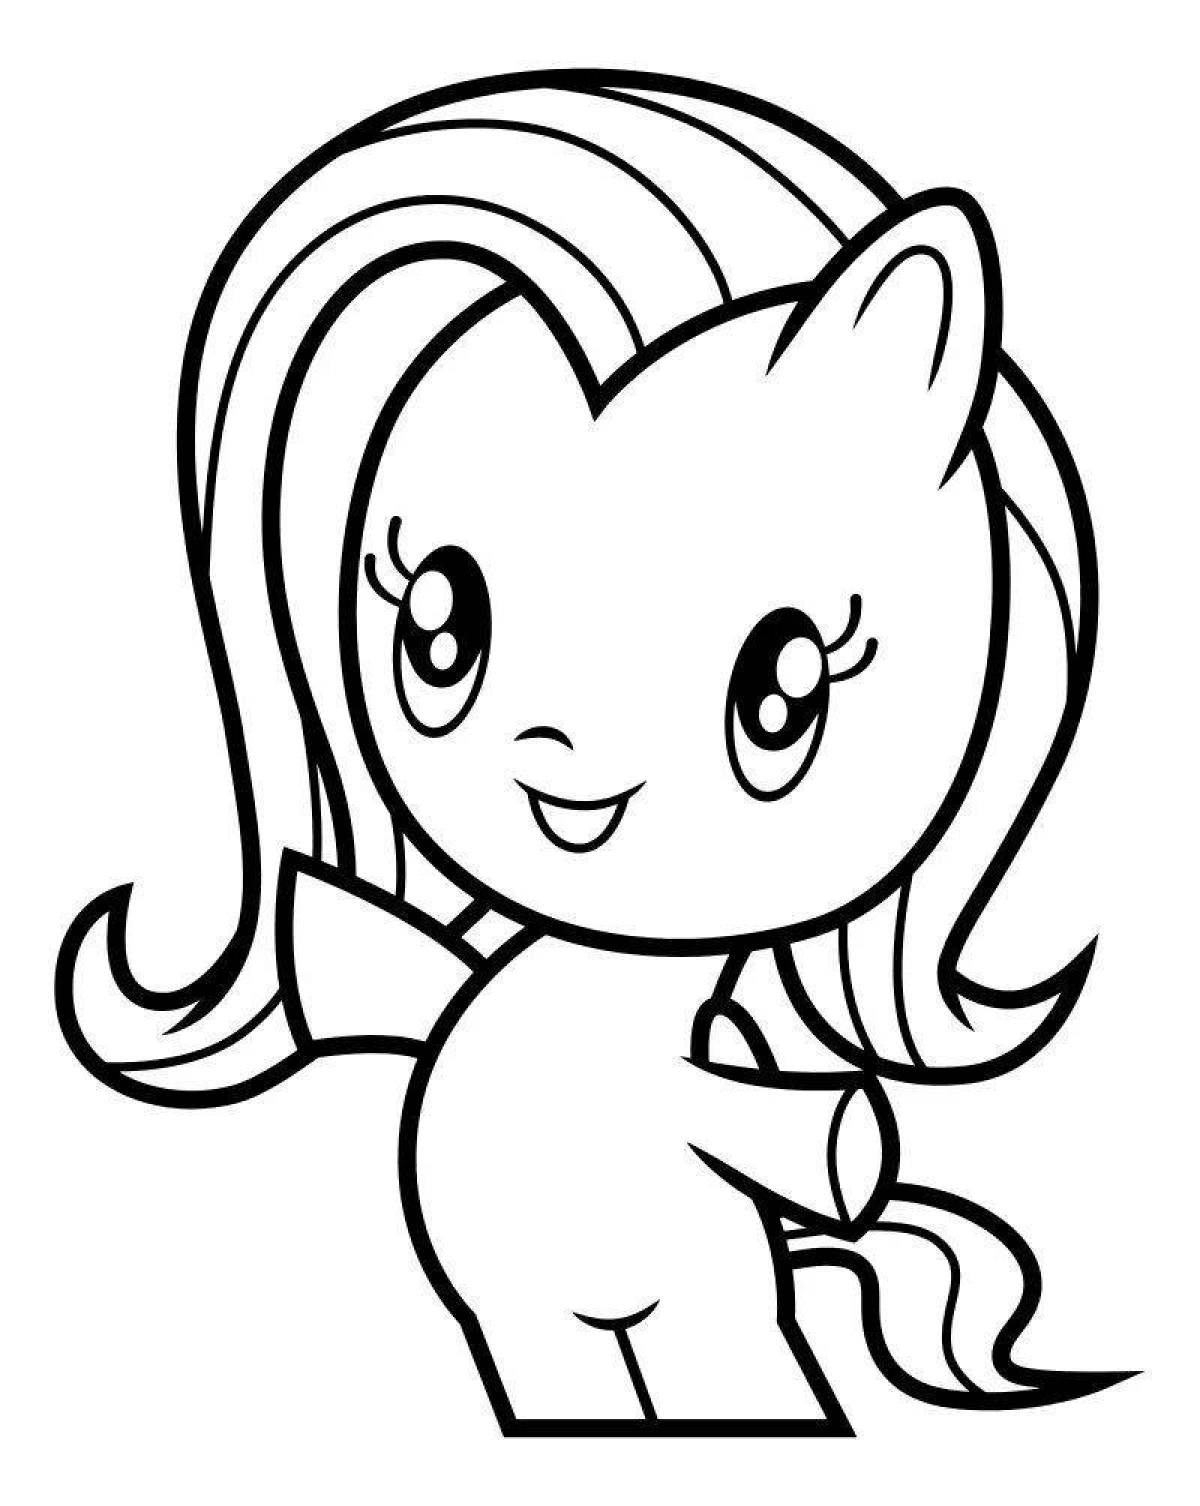 Awesome watershine pony coloring book